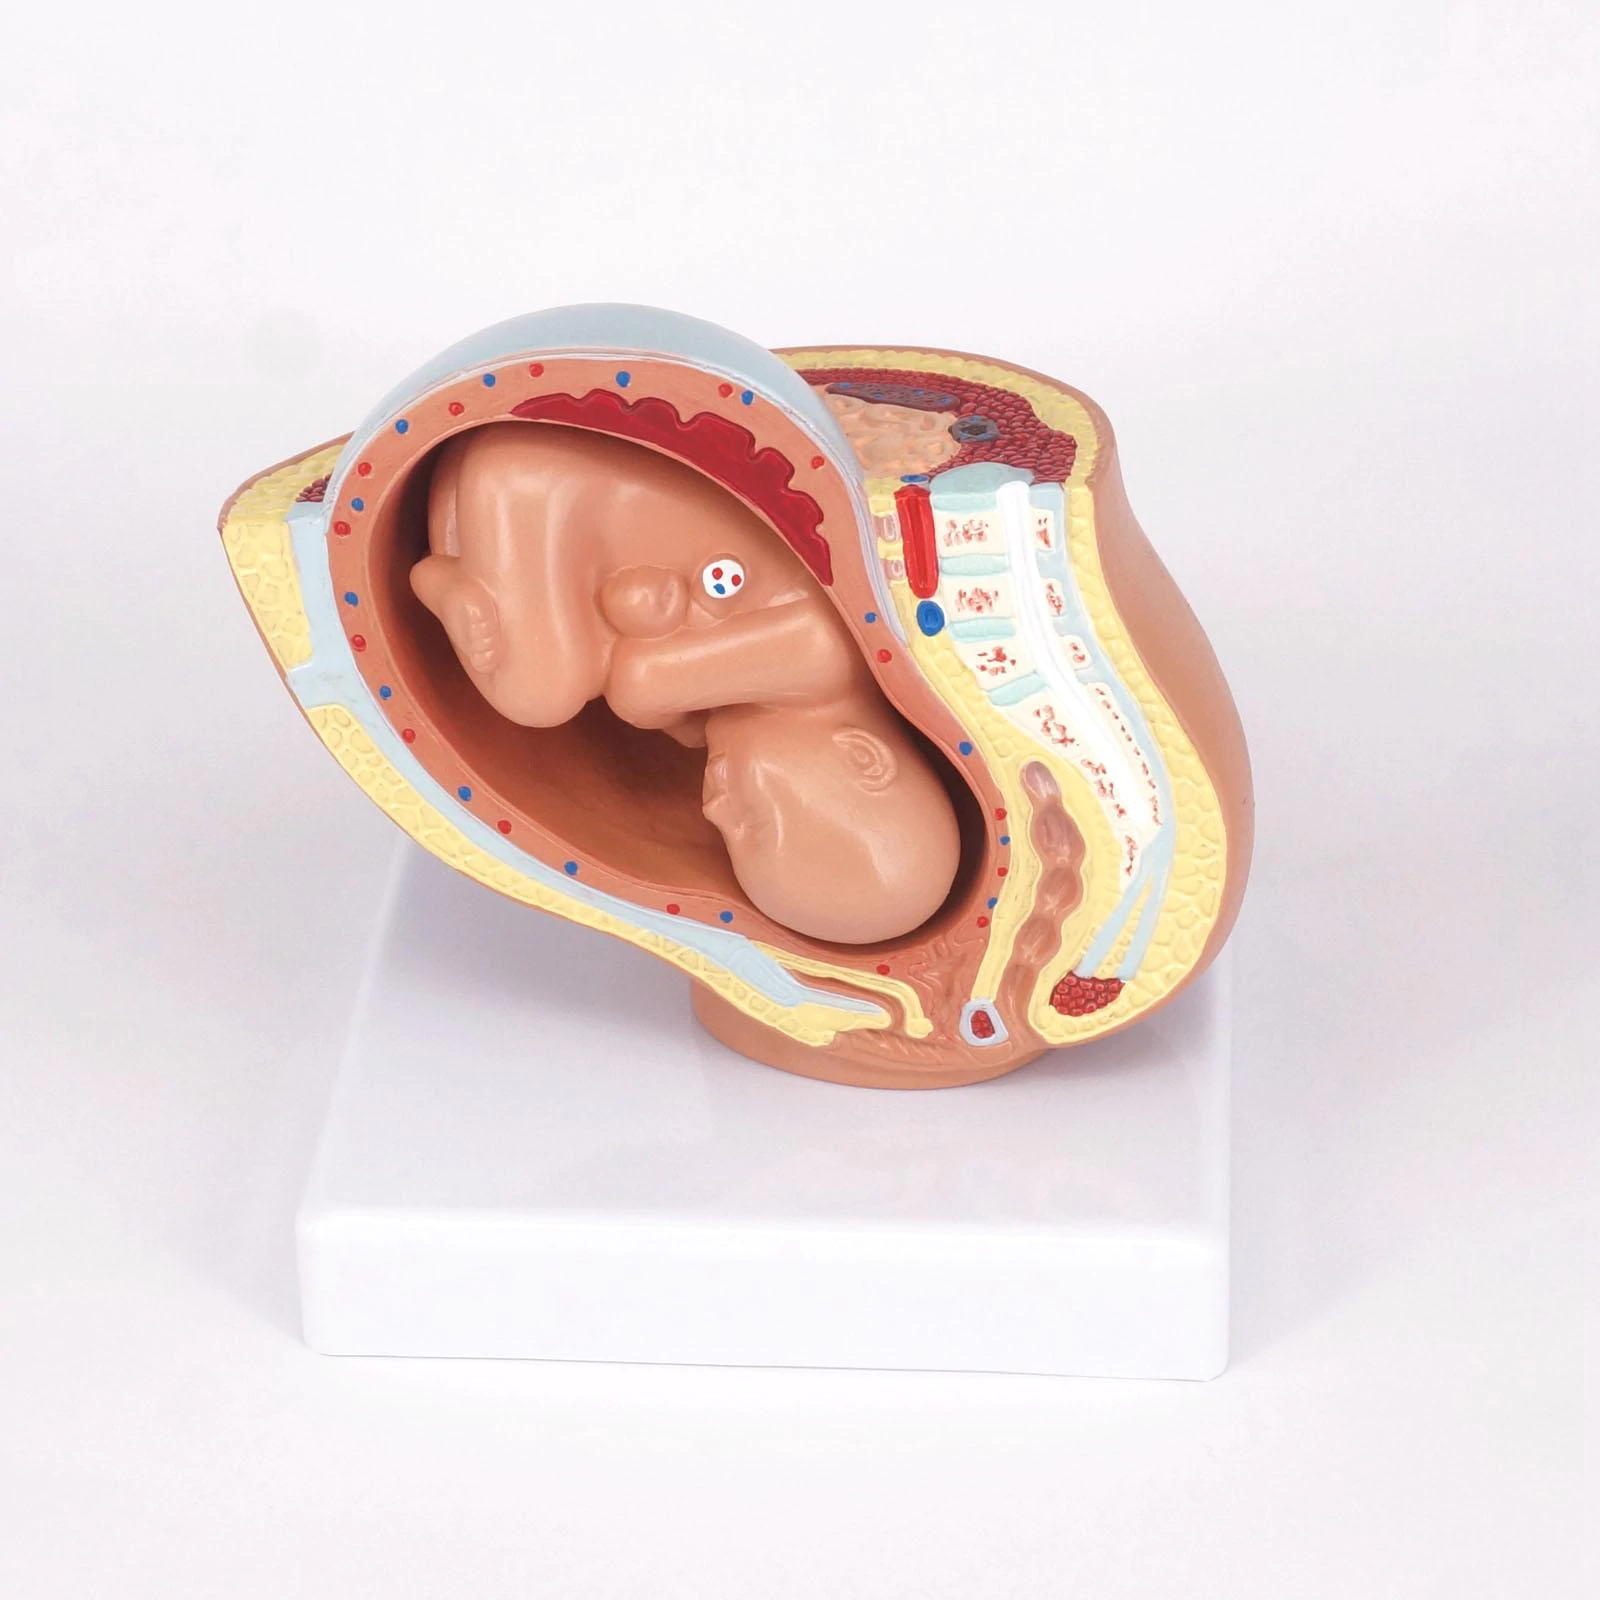 Human Female Pregnant Pelvis Section with Fetus